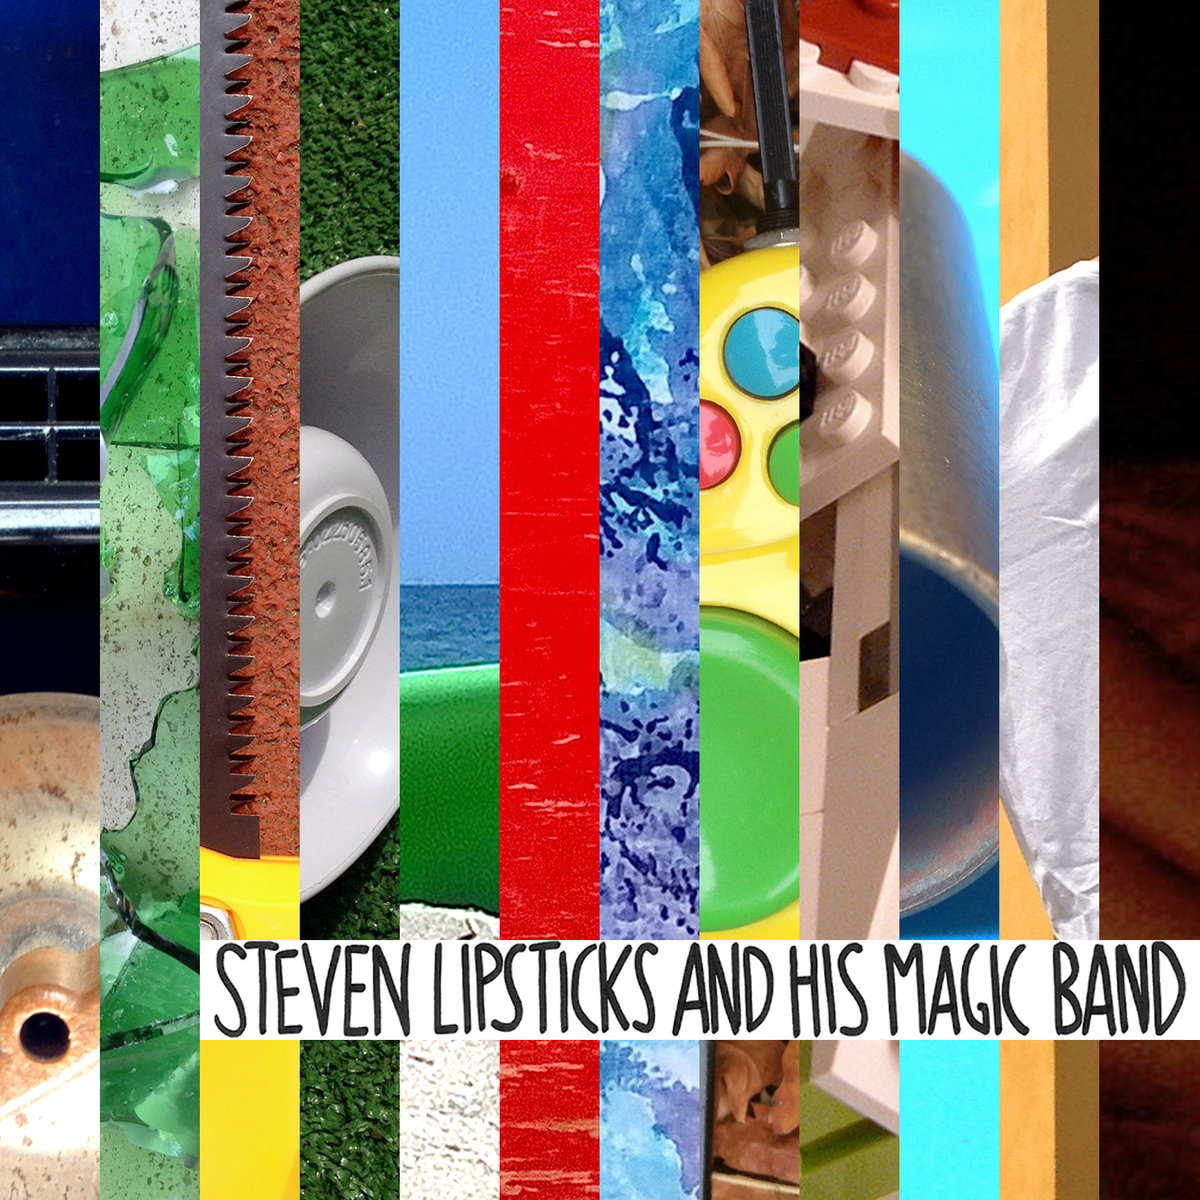 Steven Lipsticks and his Magic Band: Why Isn’t This Guy Famous?